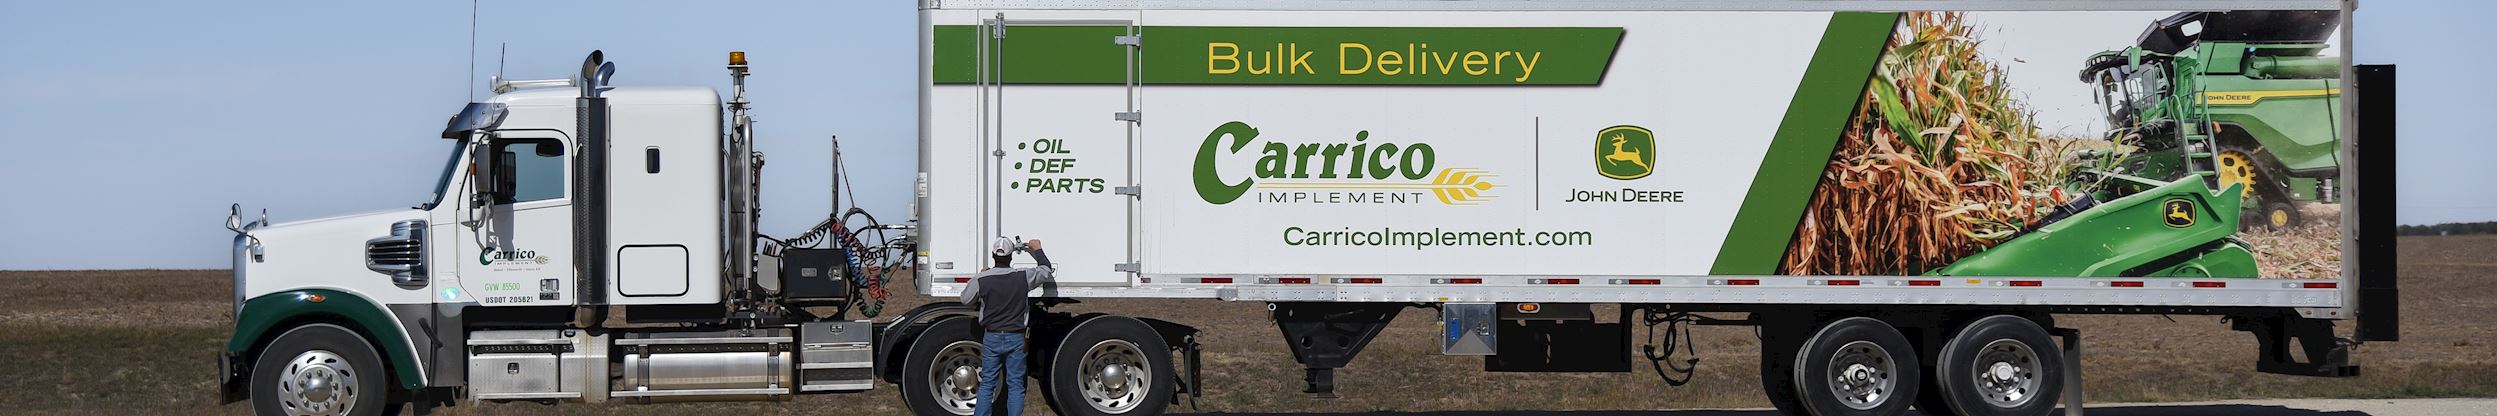 Carrico Implement Bulk Delivery Trailer